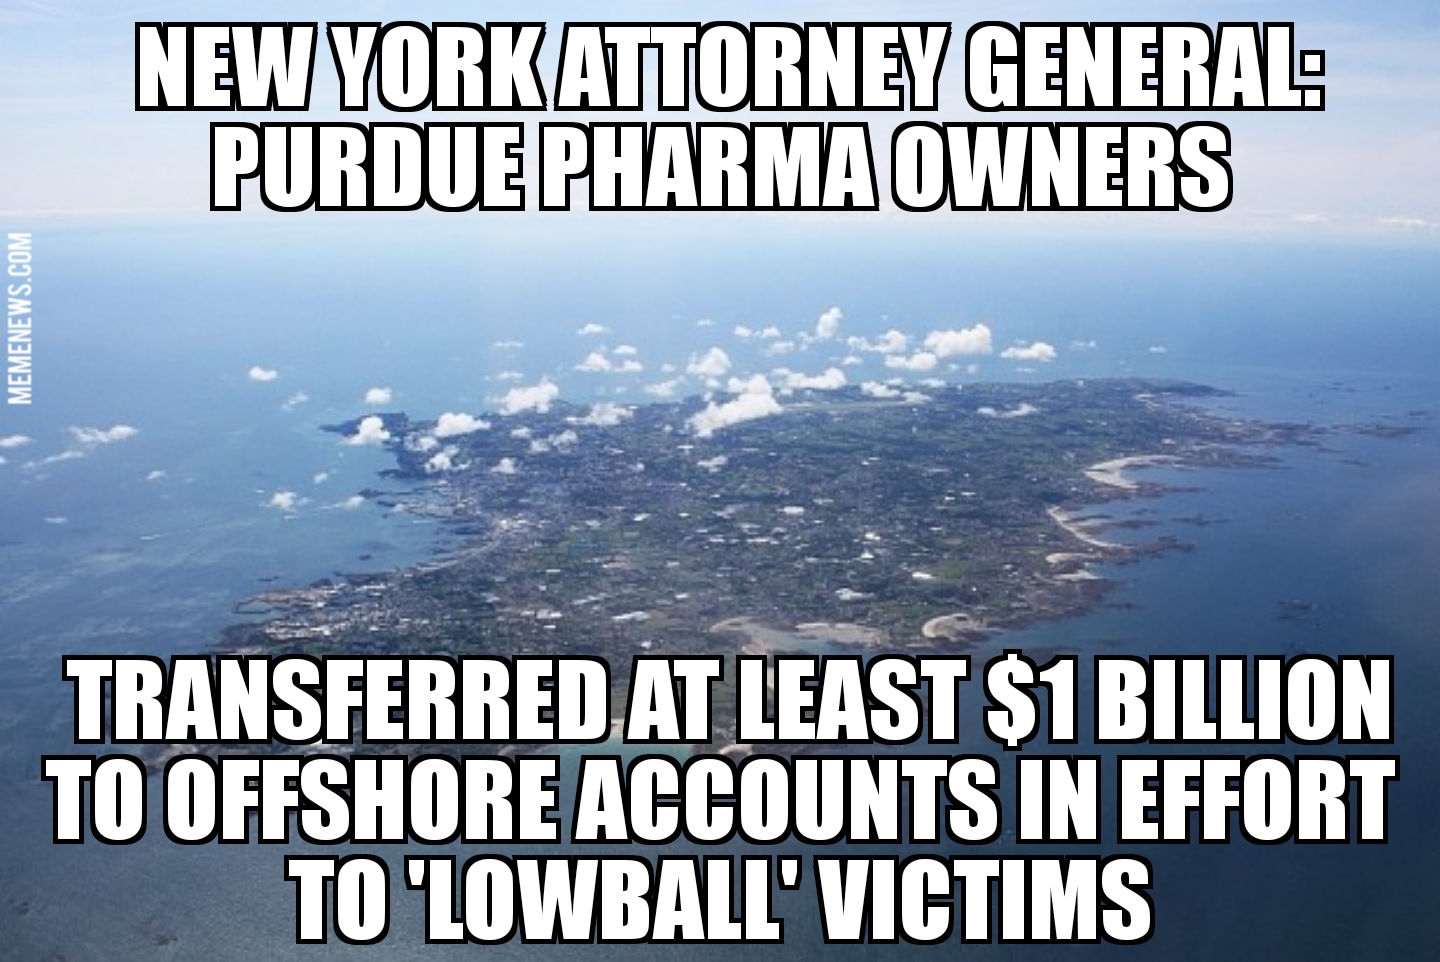 New York AG: Purdue pharma owners transferred $1 billion to ‘lowball’ victims